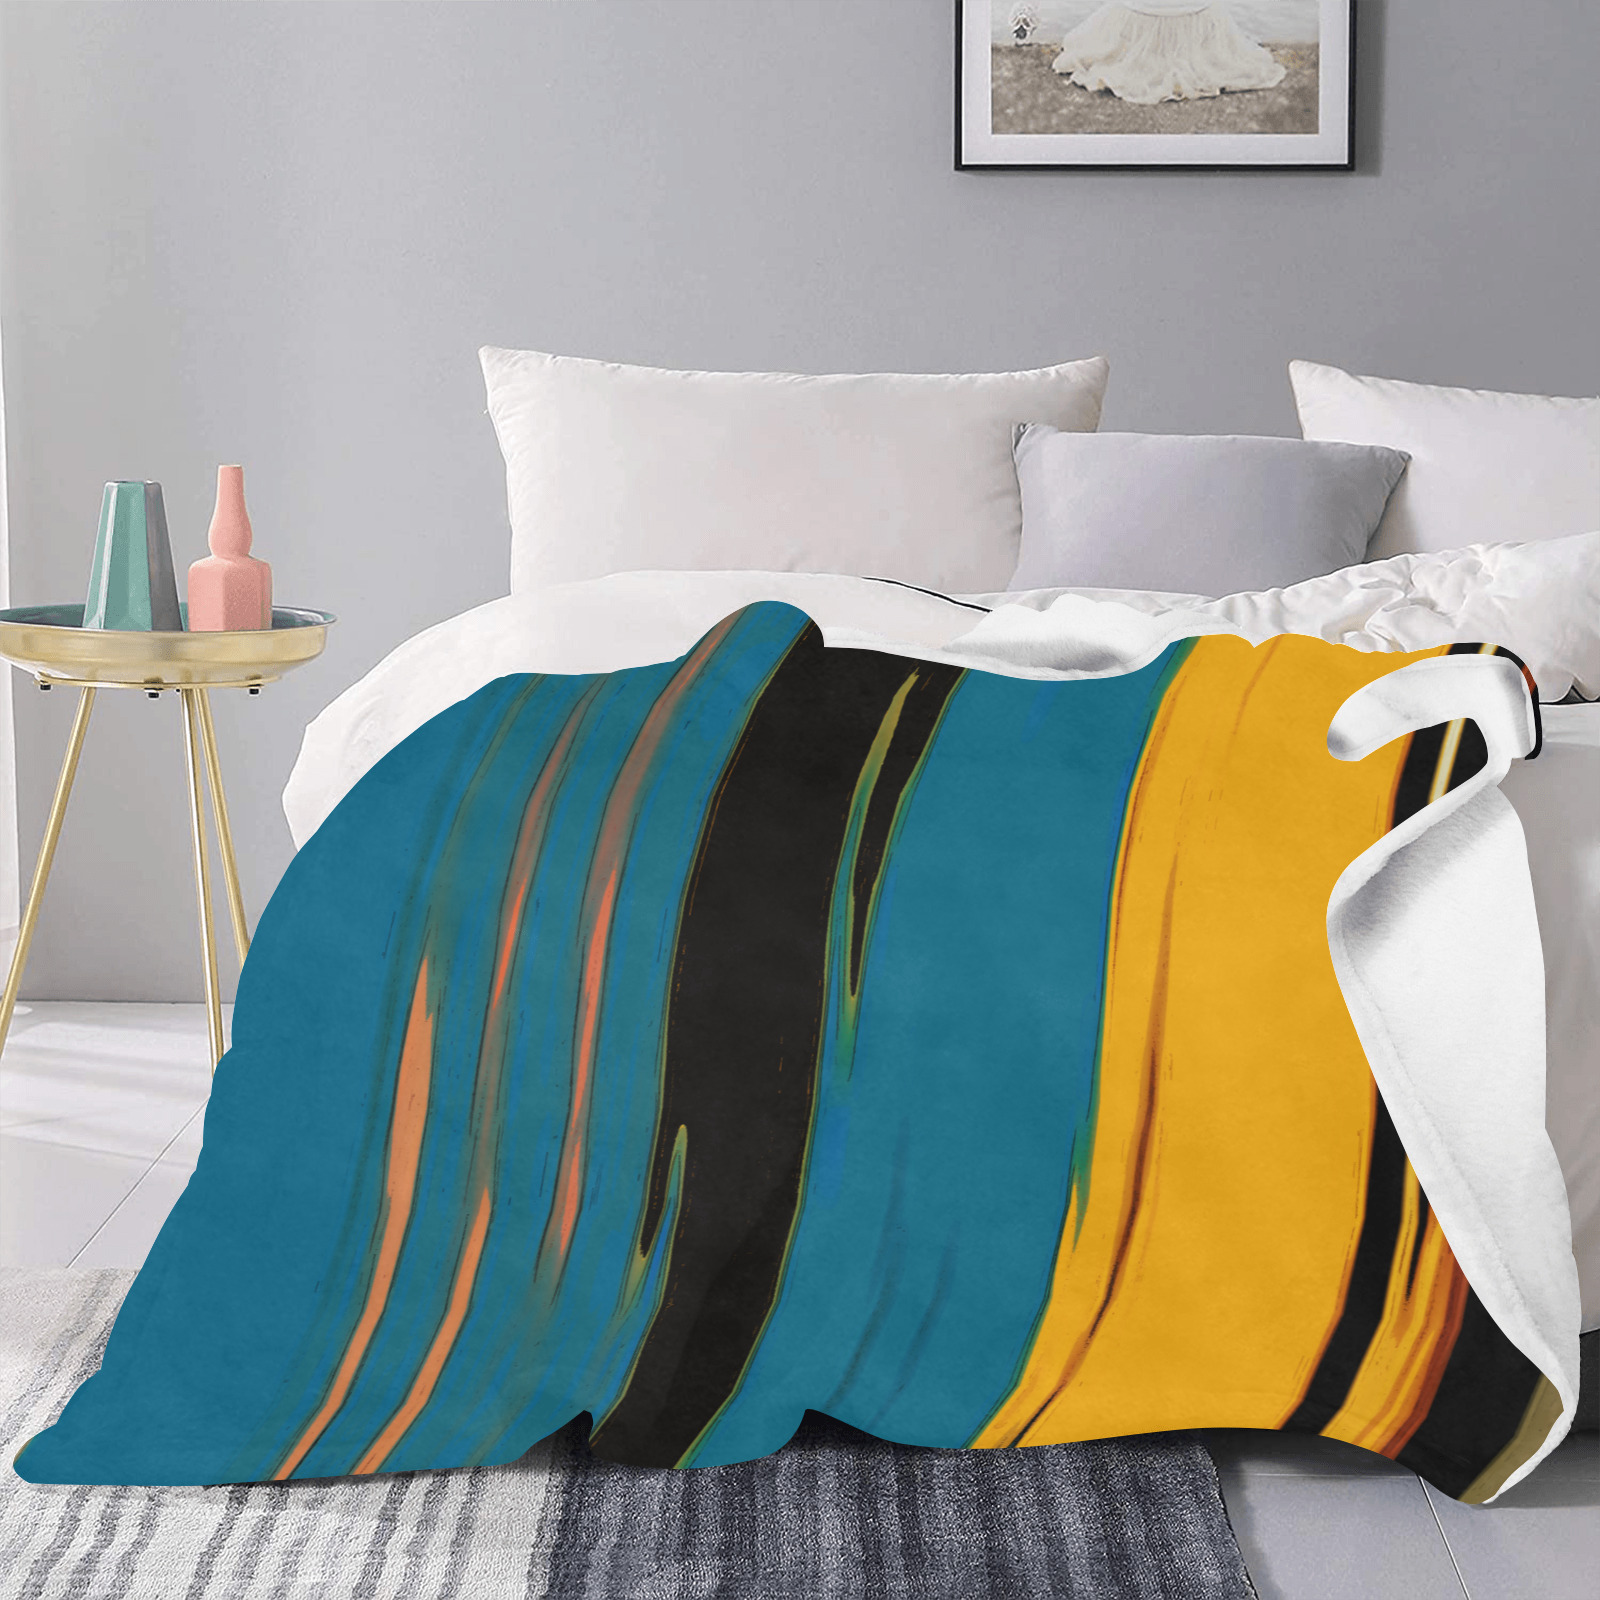 Black Turquoise And Orange Go! Abstract Art Ultra-Soft Micro Fleece Blanket 50"x60" (Thick)